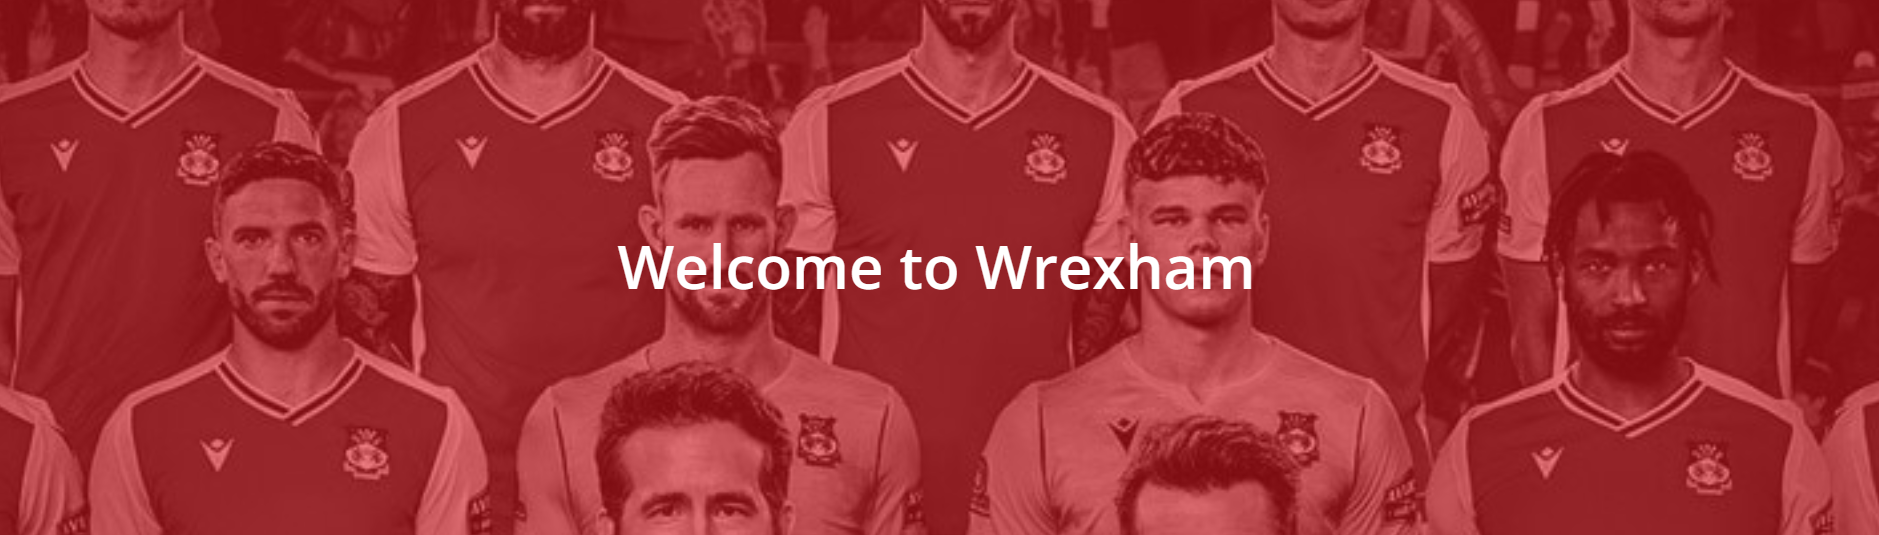 The Transformation of Wrexham, a 158-Year-Old Club, After Being Acquired by Hollywood Stars Ryan Reynolds and Rob McElhenney